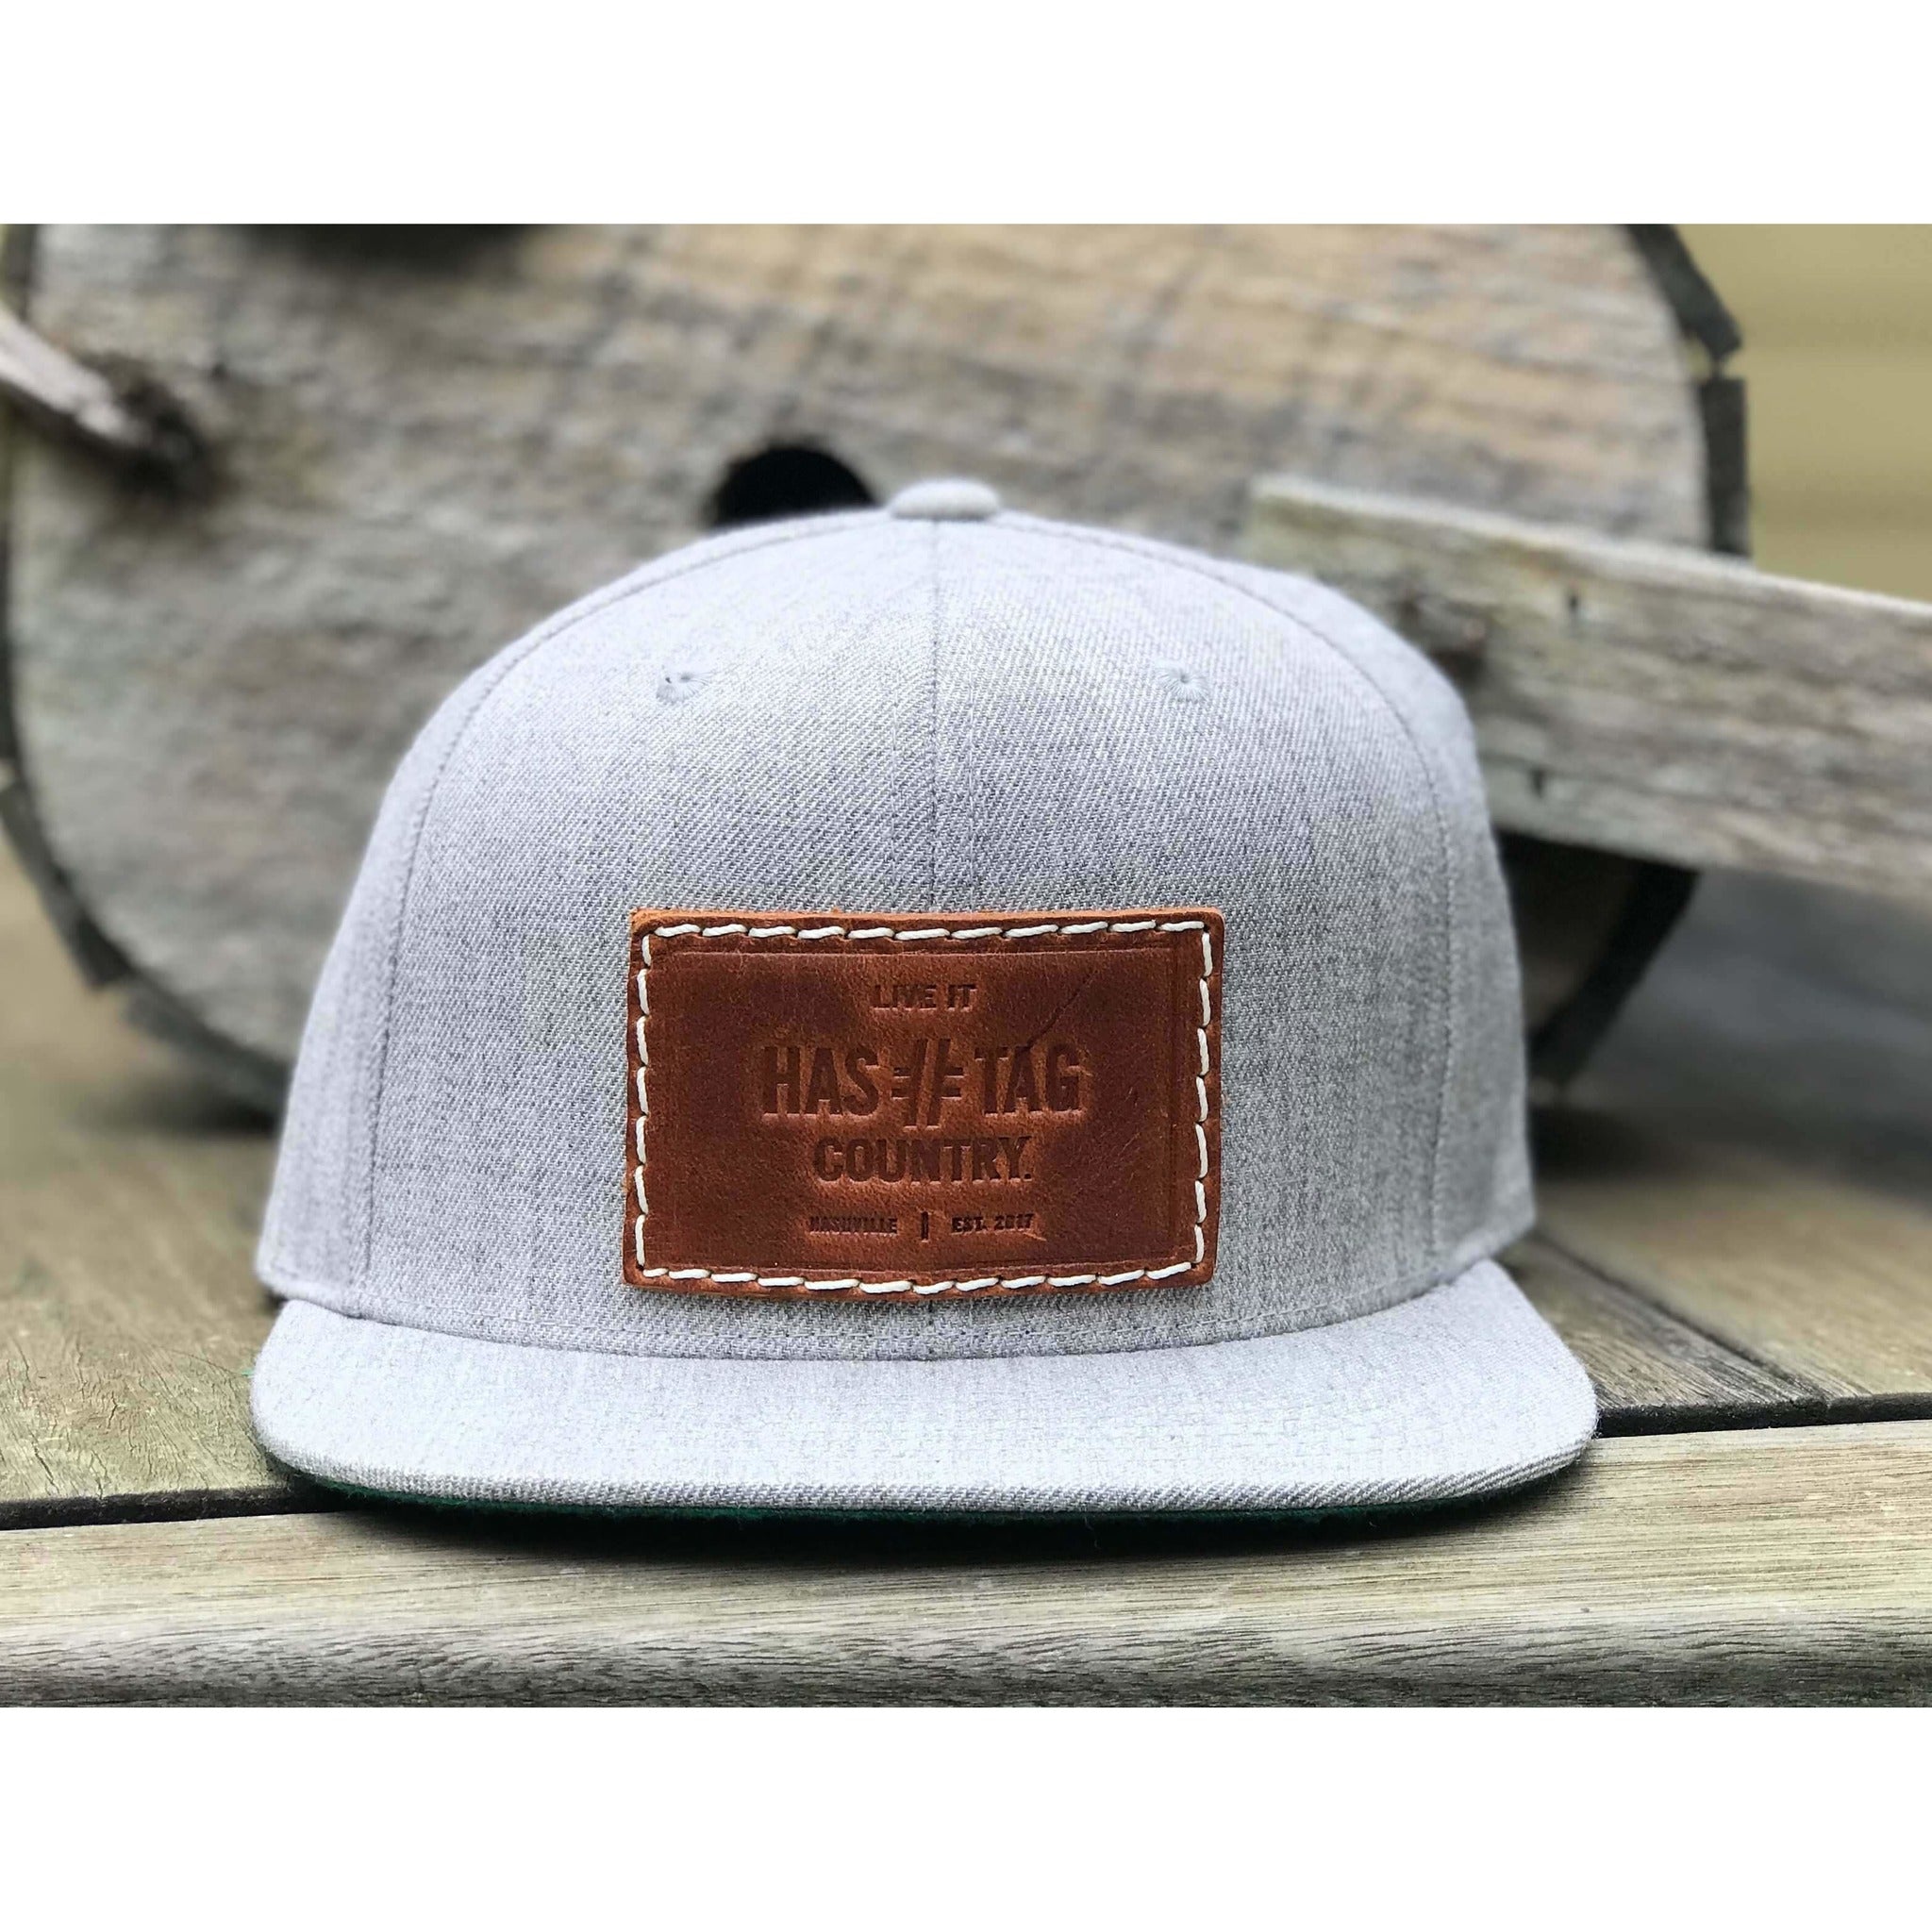 Hashtag Live It Leather Patch Snapback - Hashtag Country